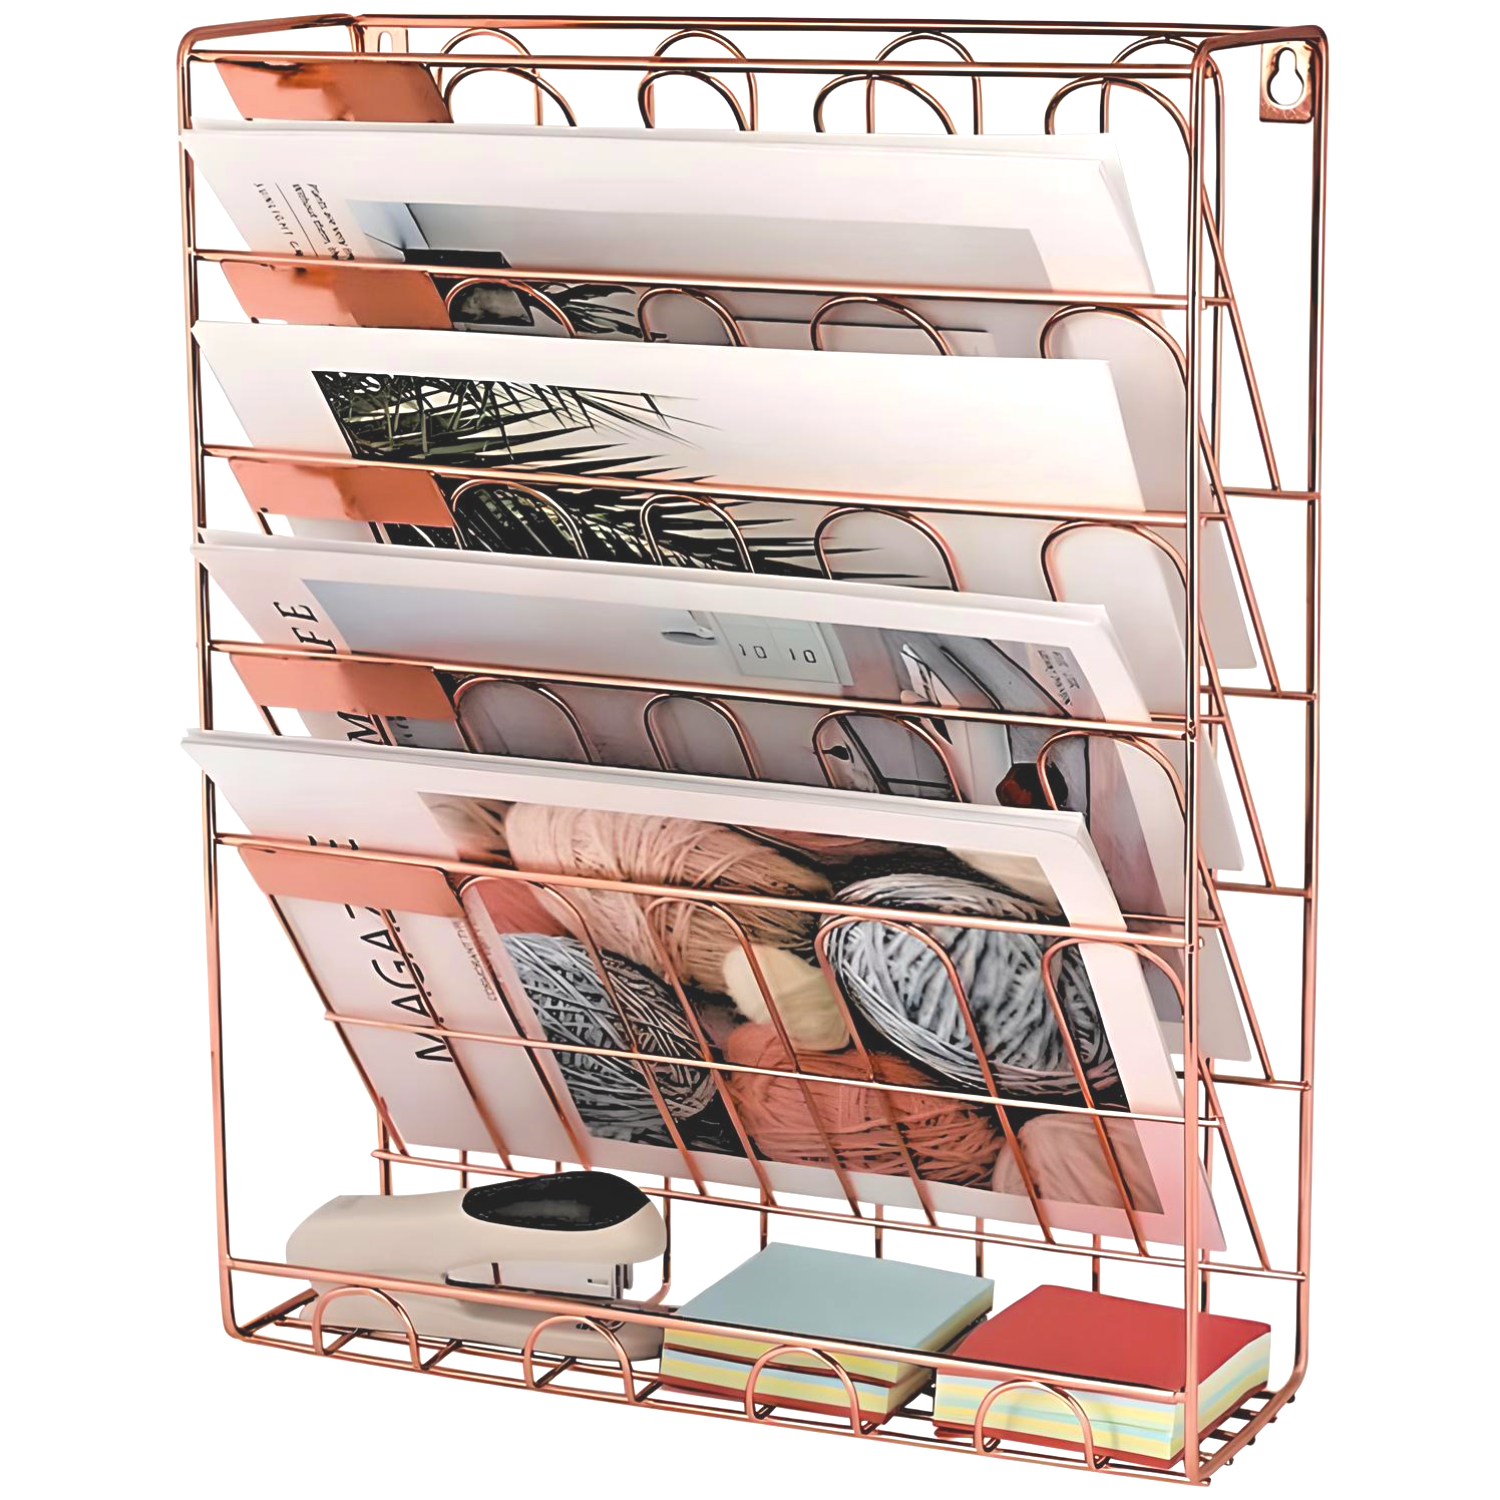 A copper wire wall file organizer with several magazines in it.